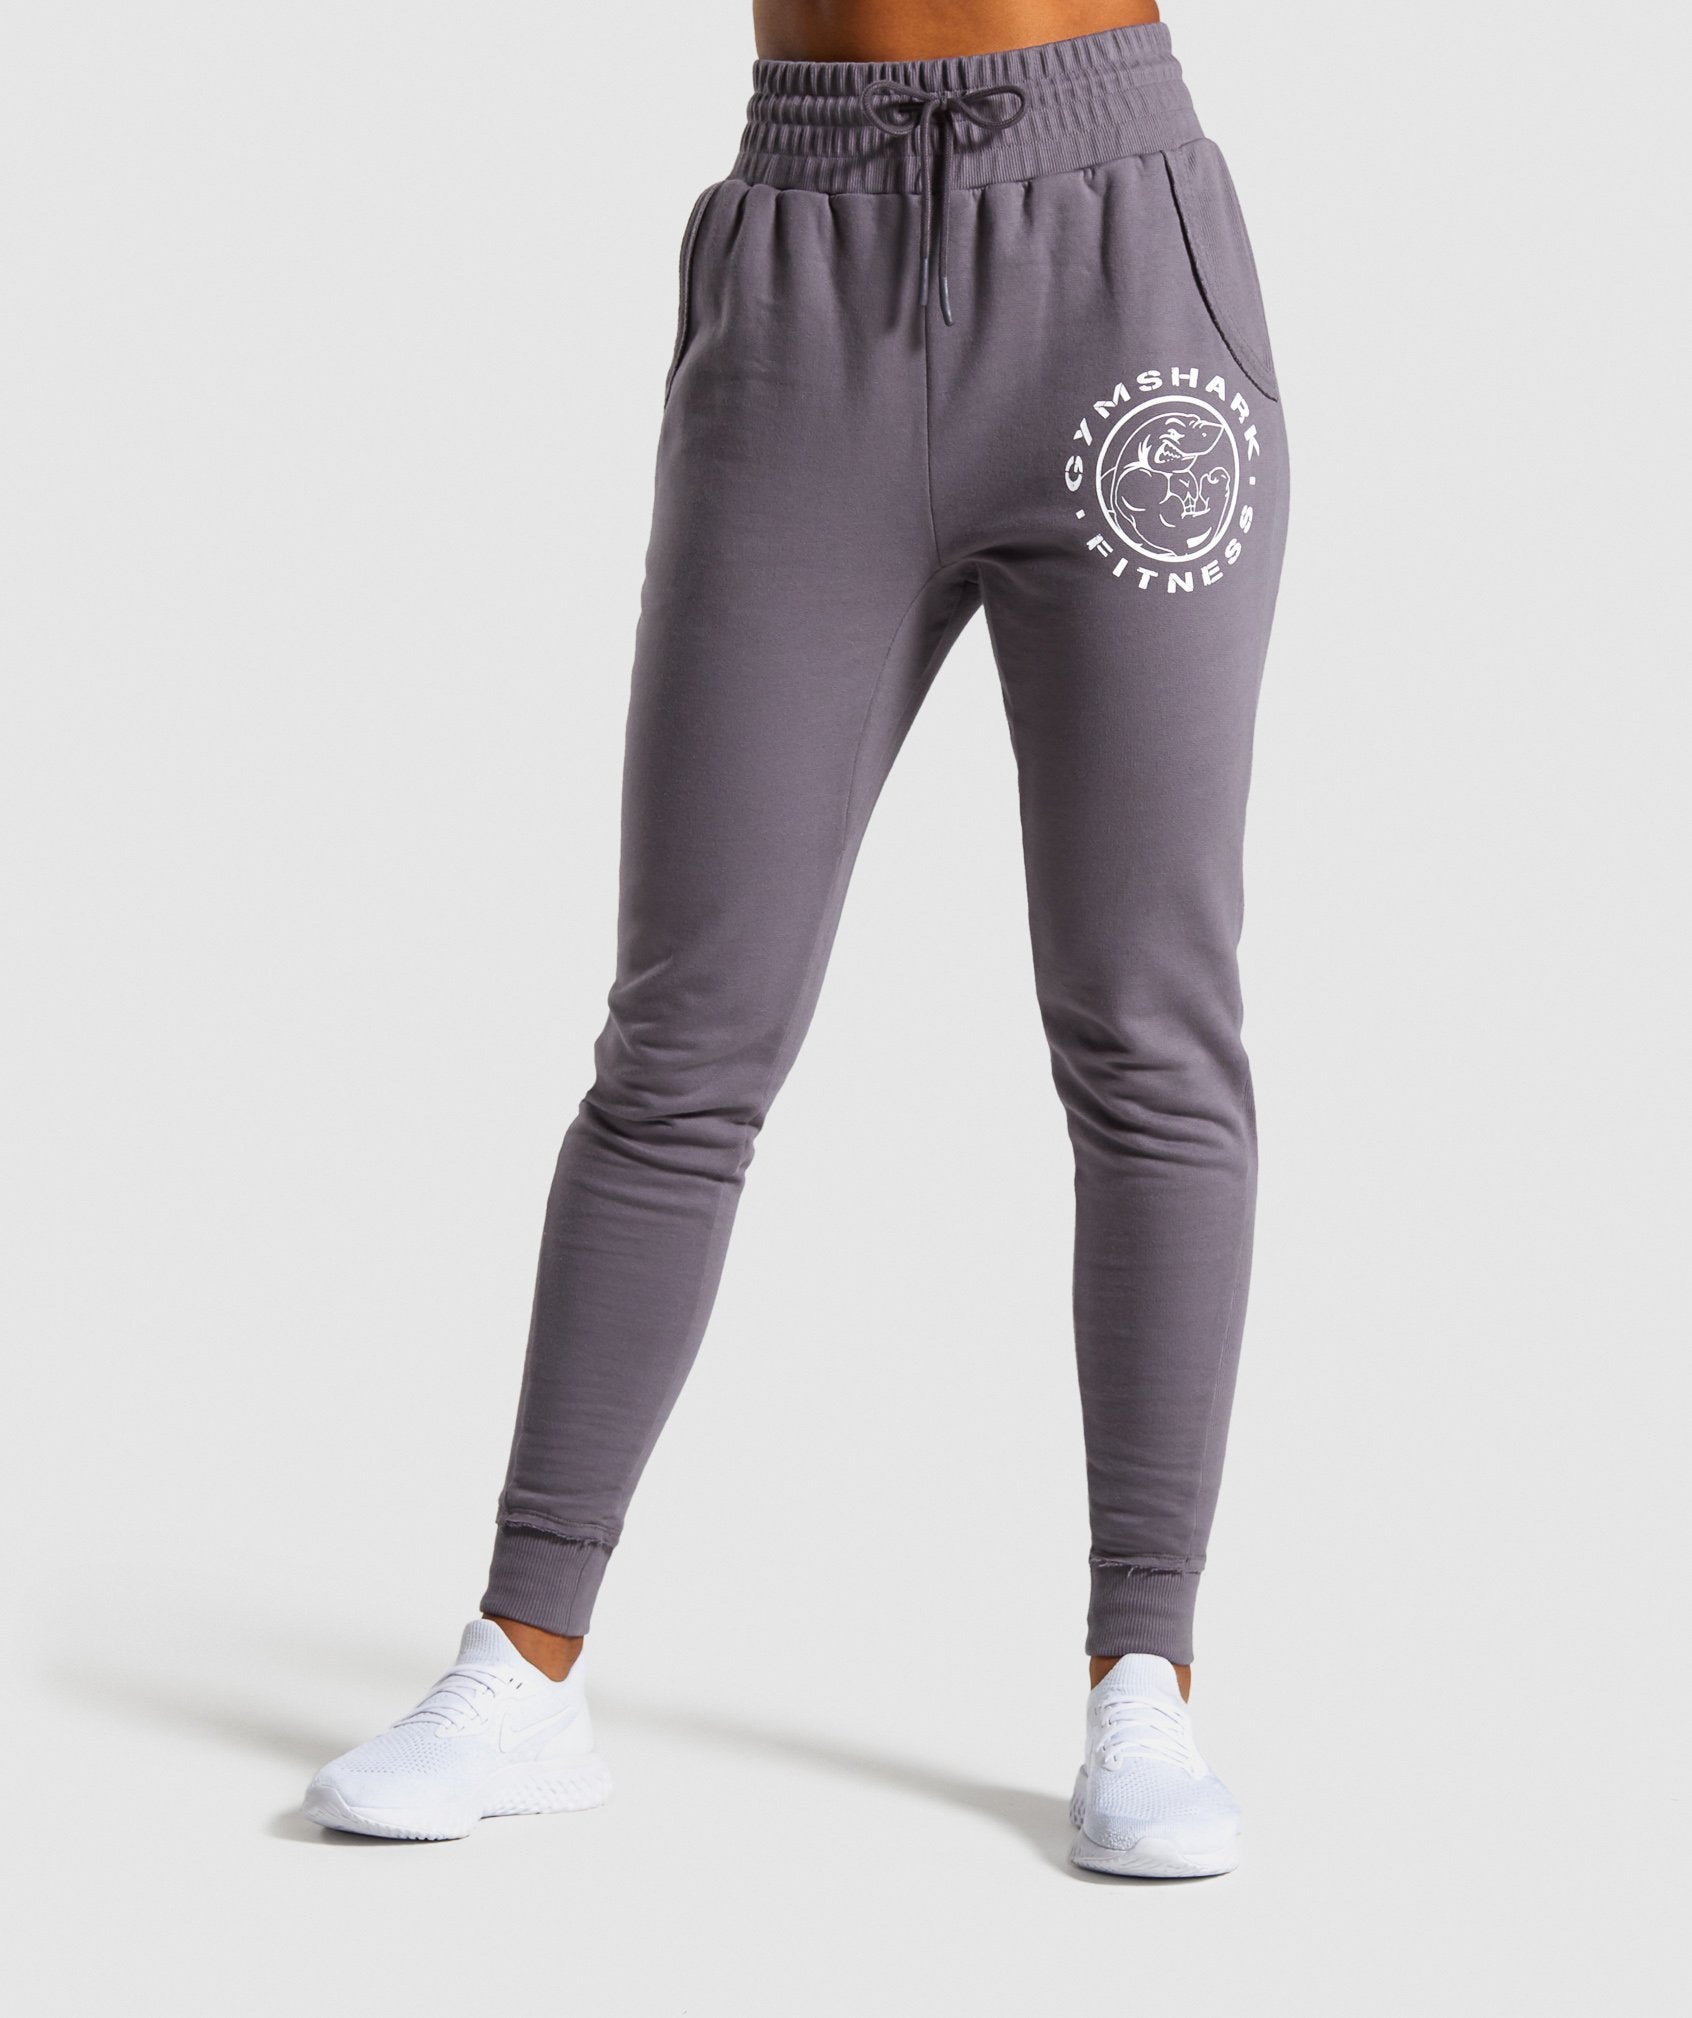 Legacy Fitness Joggers in Slate Lavender - view 1